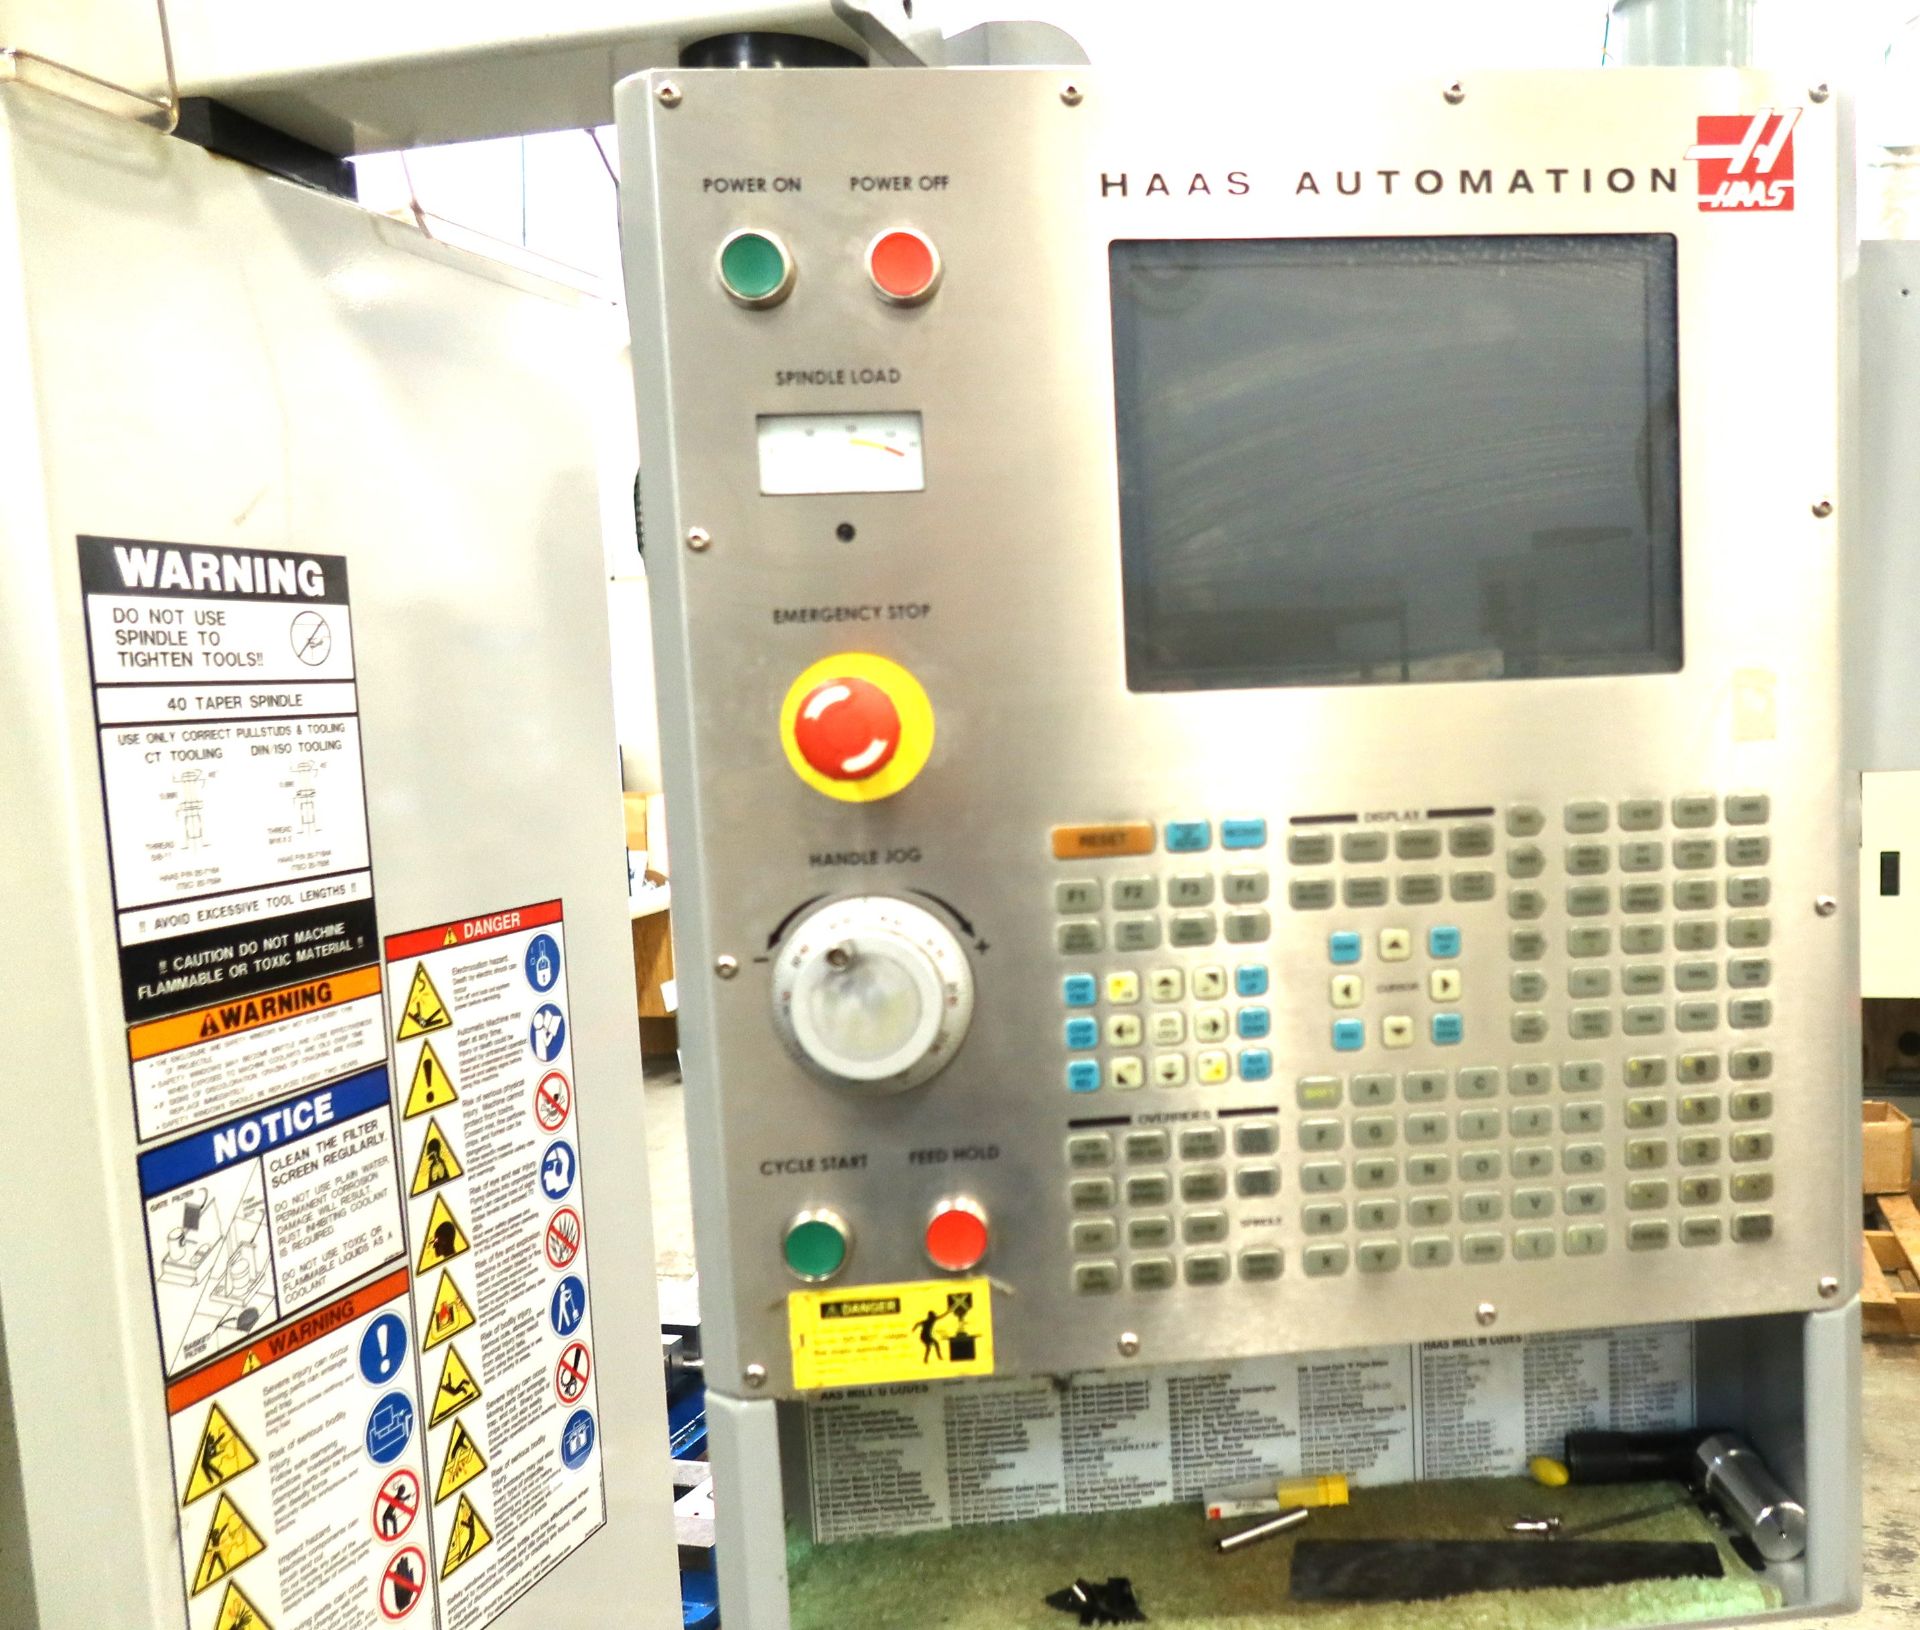 2006 Haas Mini Mill CNC 4-Axis Vertical Machining Center, SN 1053877 - Image 2 of 7